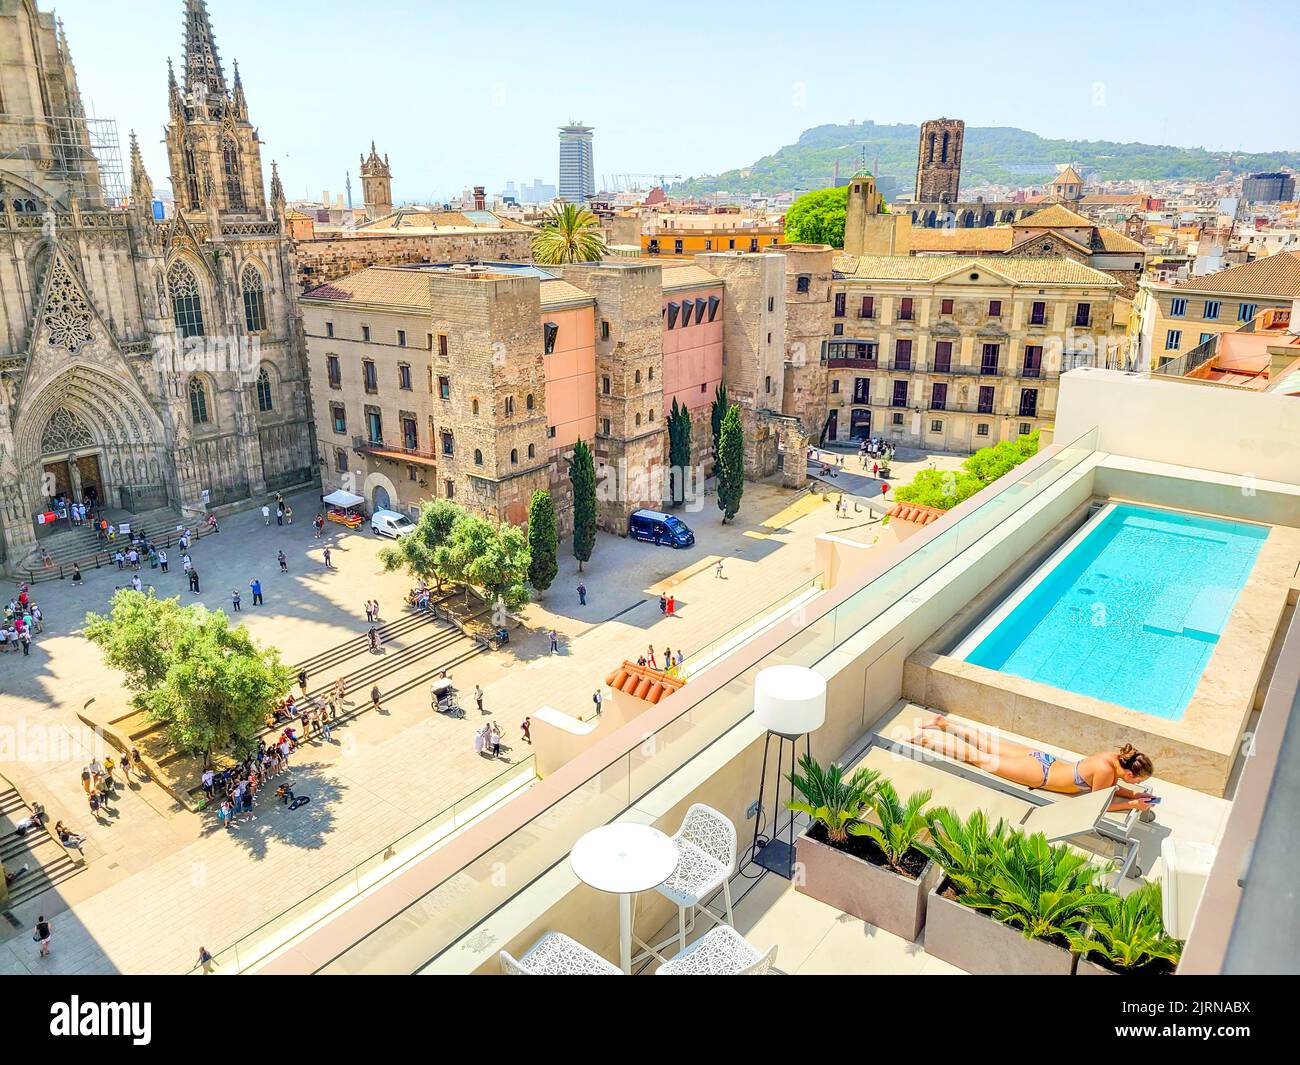 A young woman sunbathes on the rooftop terrace with pool and cafe at a luxury hotel in Barcelona, Spain. Stock Photo